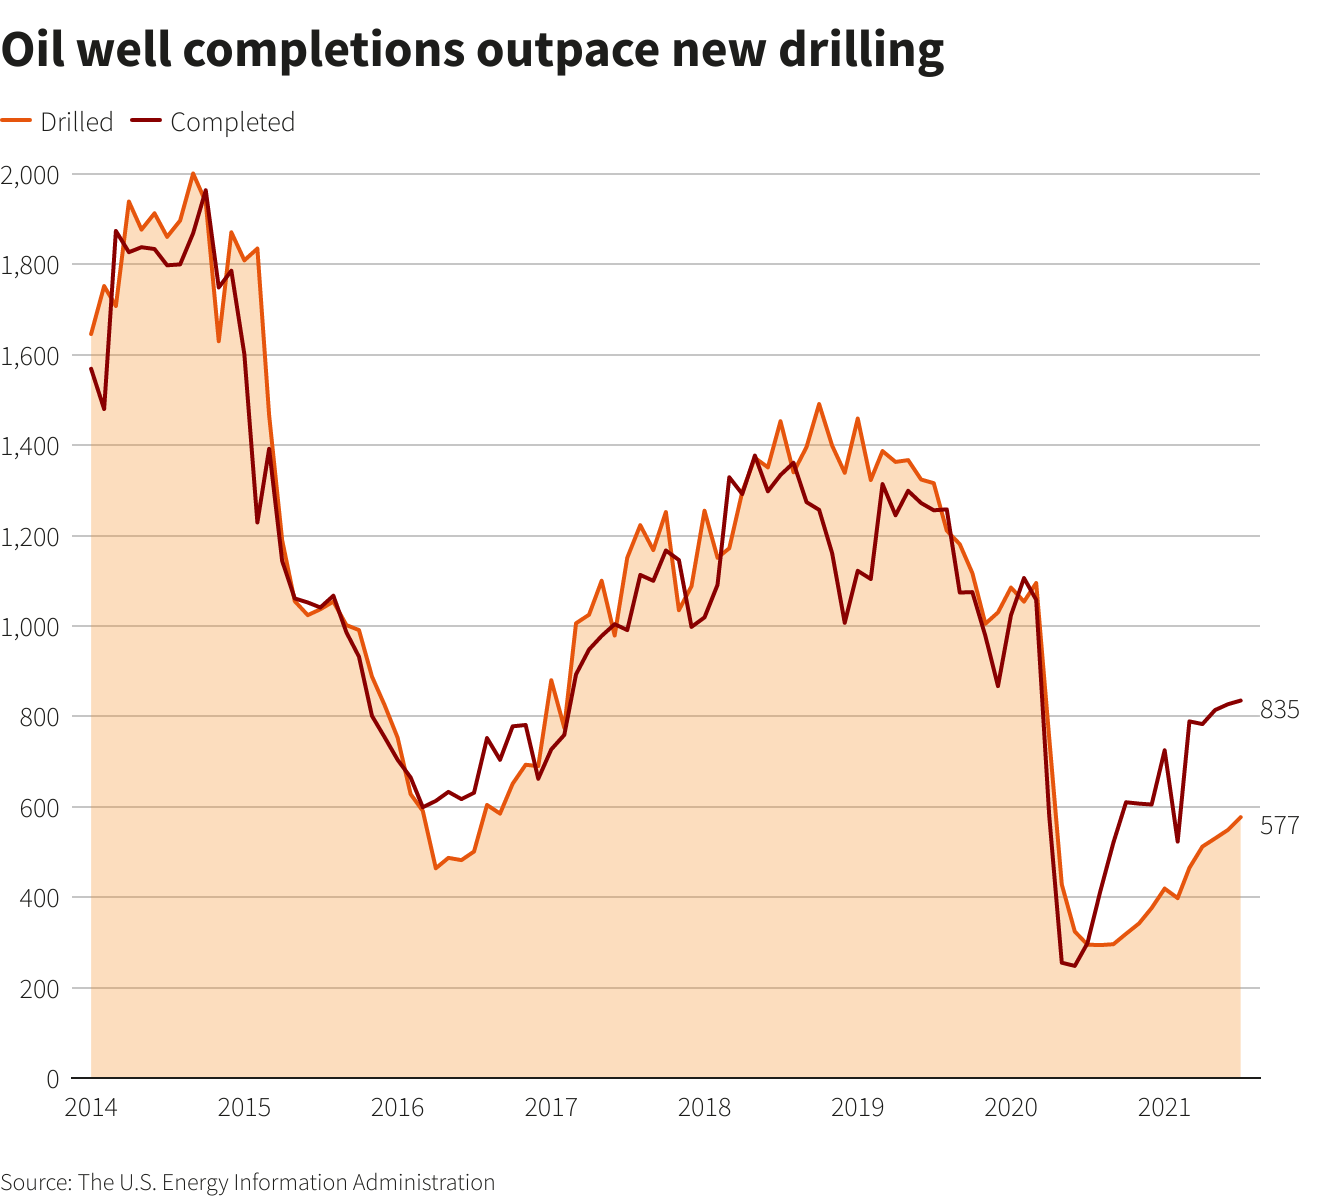 Oil well completions outpace new drilling